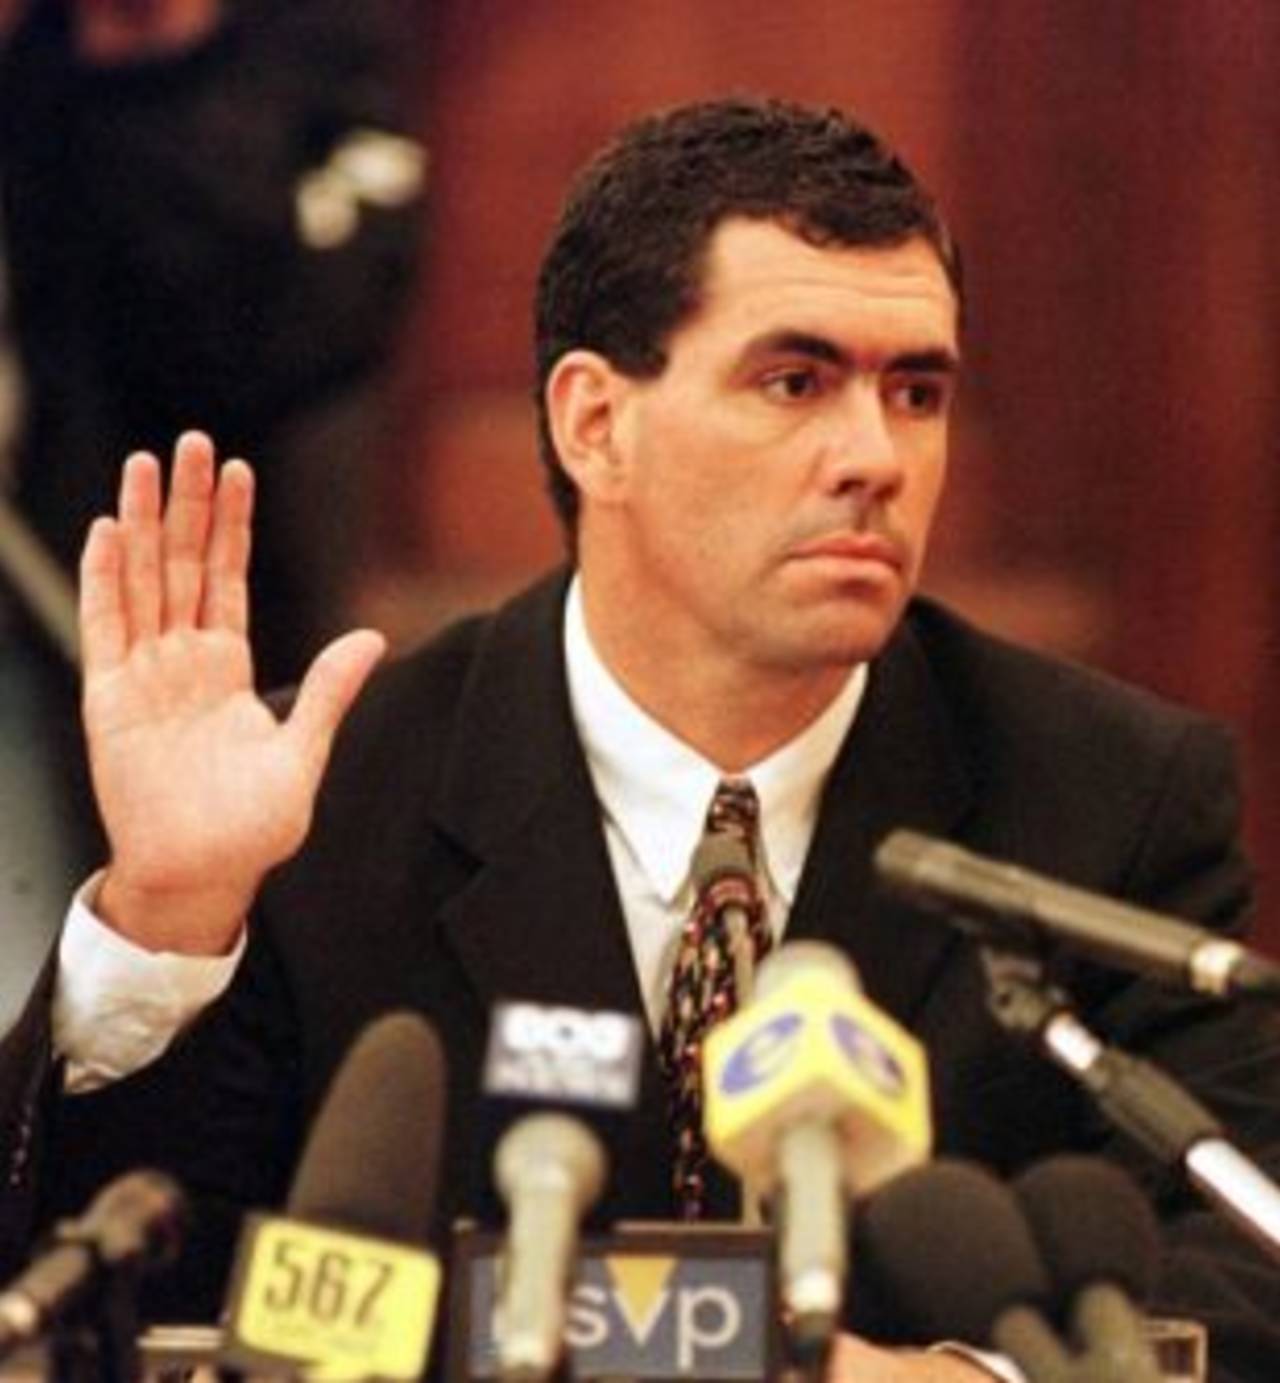 Hansie Cronje takes his oath in front of the King Commisson, Cape Town, June 23, 2000